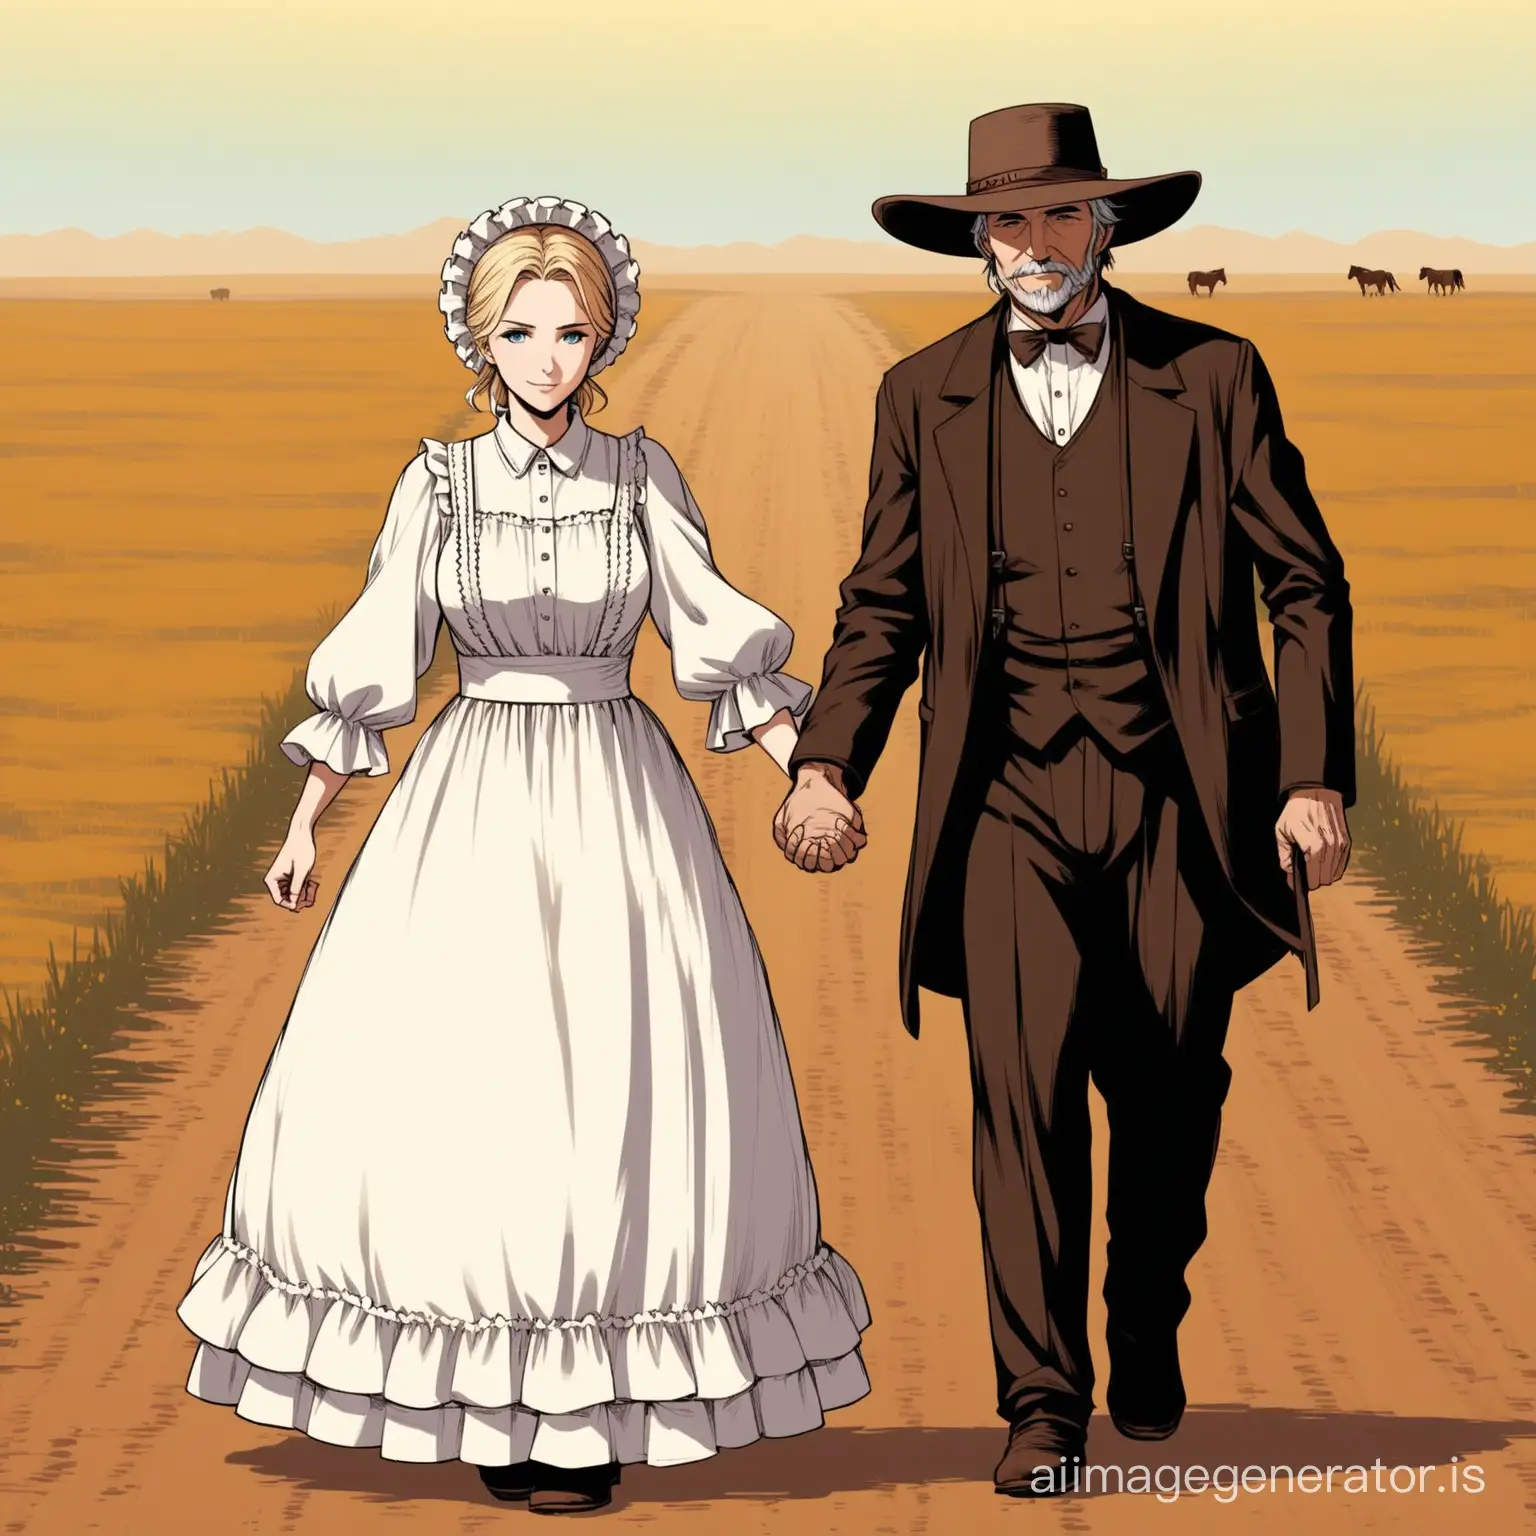 Newlywed-Couple-in-Old-West-Farmers-Attire